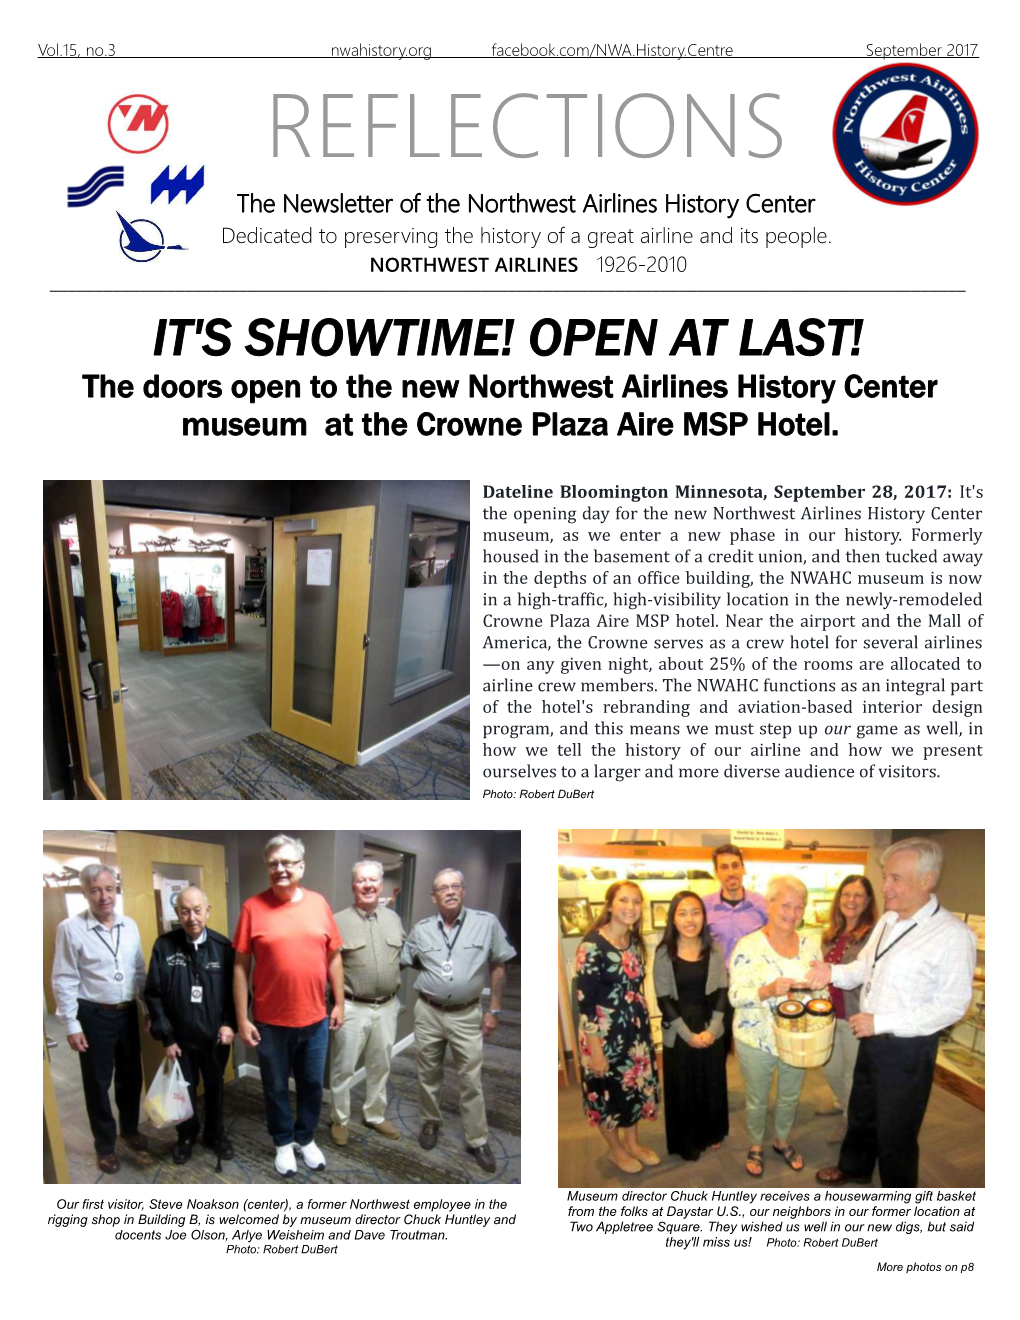 September 2017 REFLECTIONS the Newsletter of the Northwest Airlines History Center Dedicated to Preserving the History of a Great Airline and Its People